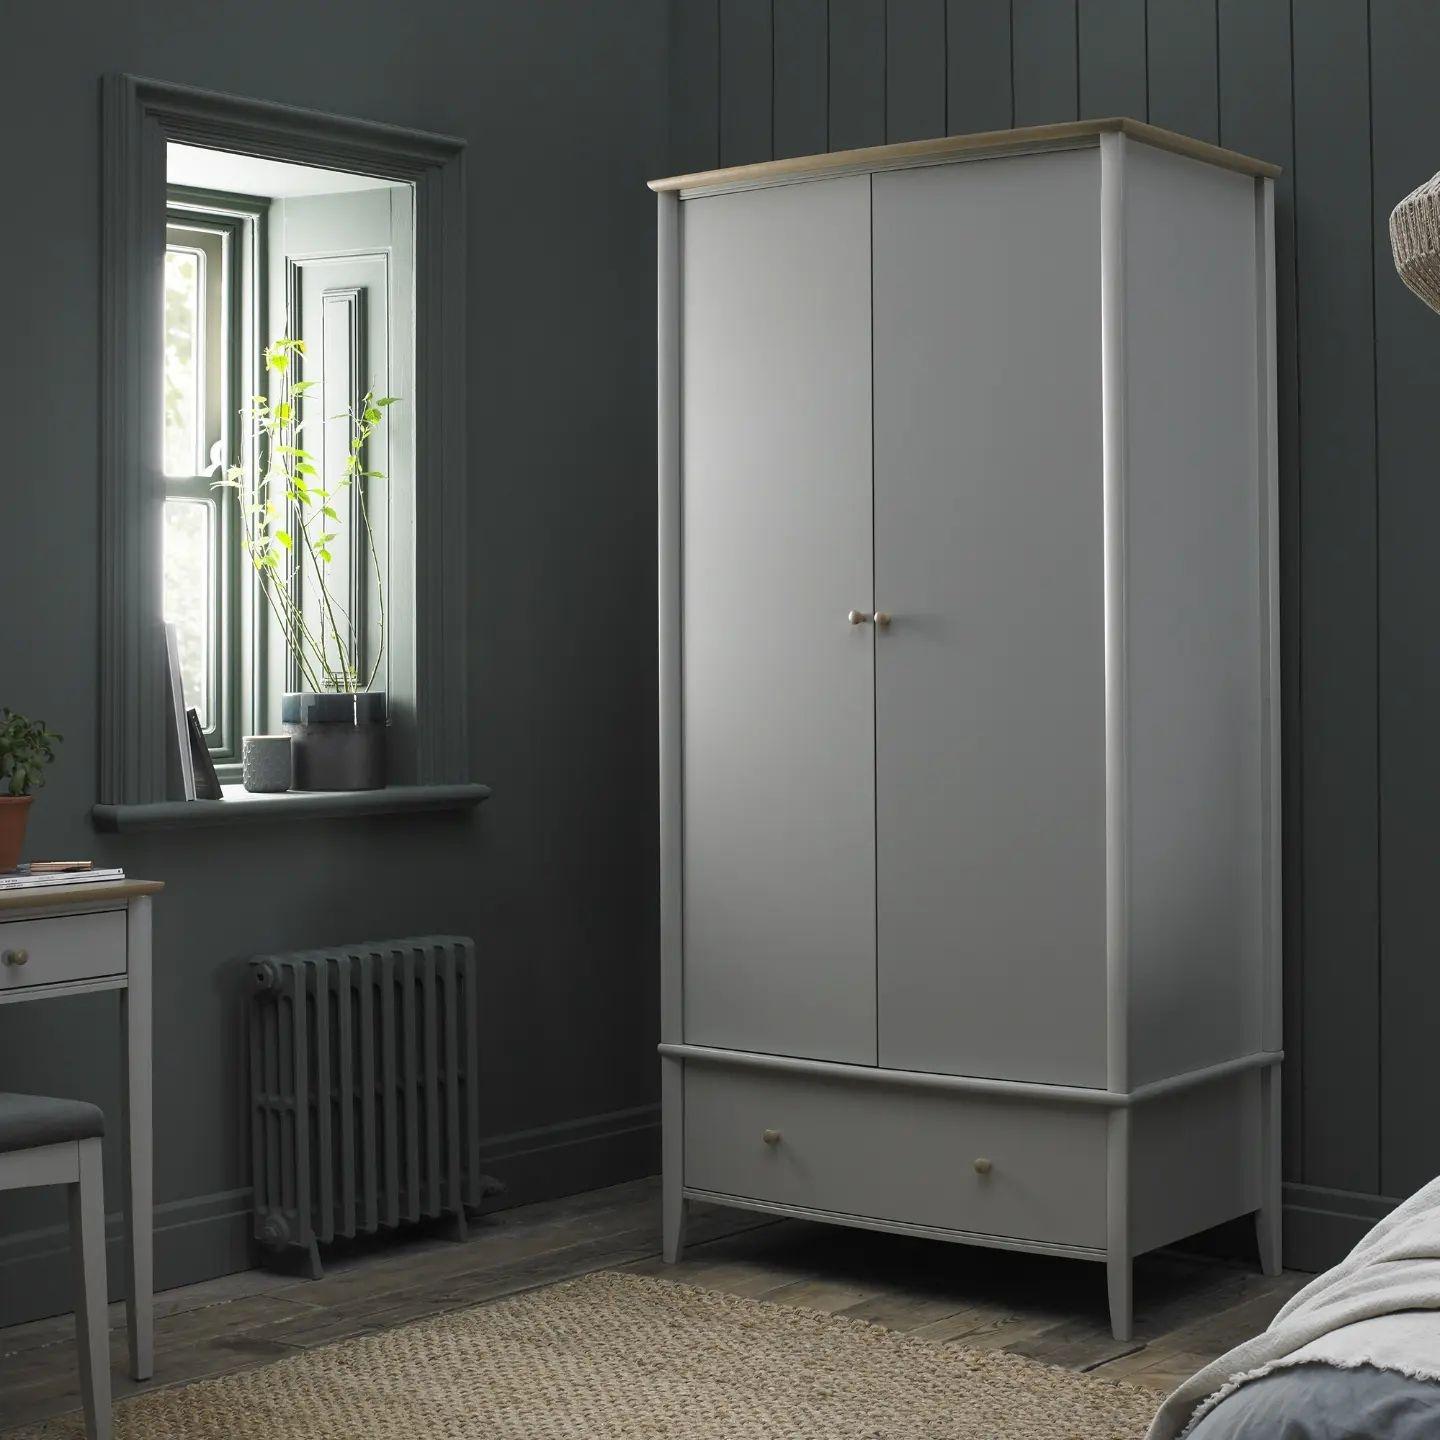 Take a look at our incredible Whitby Double Wardrobe. Experience the perfect blend of style and pract...